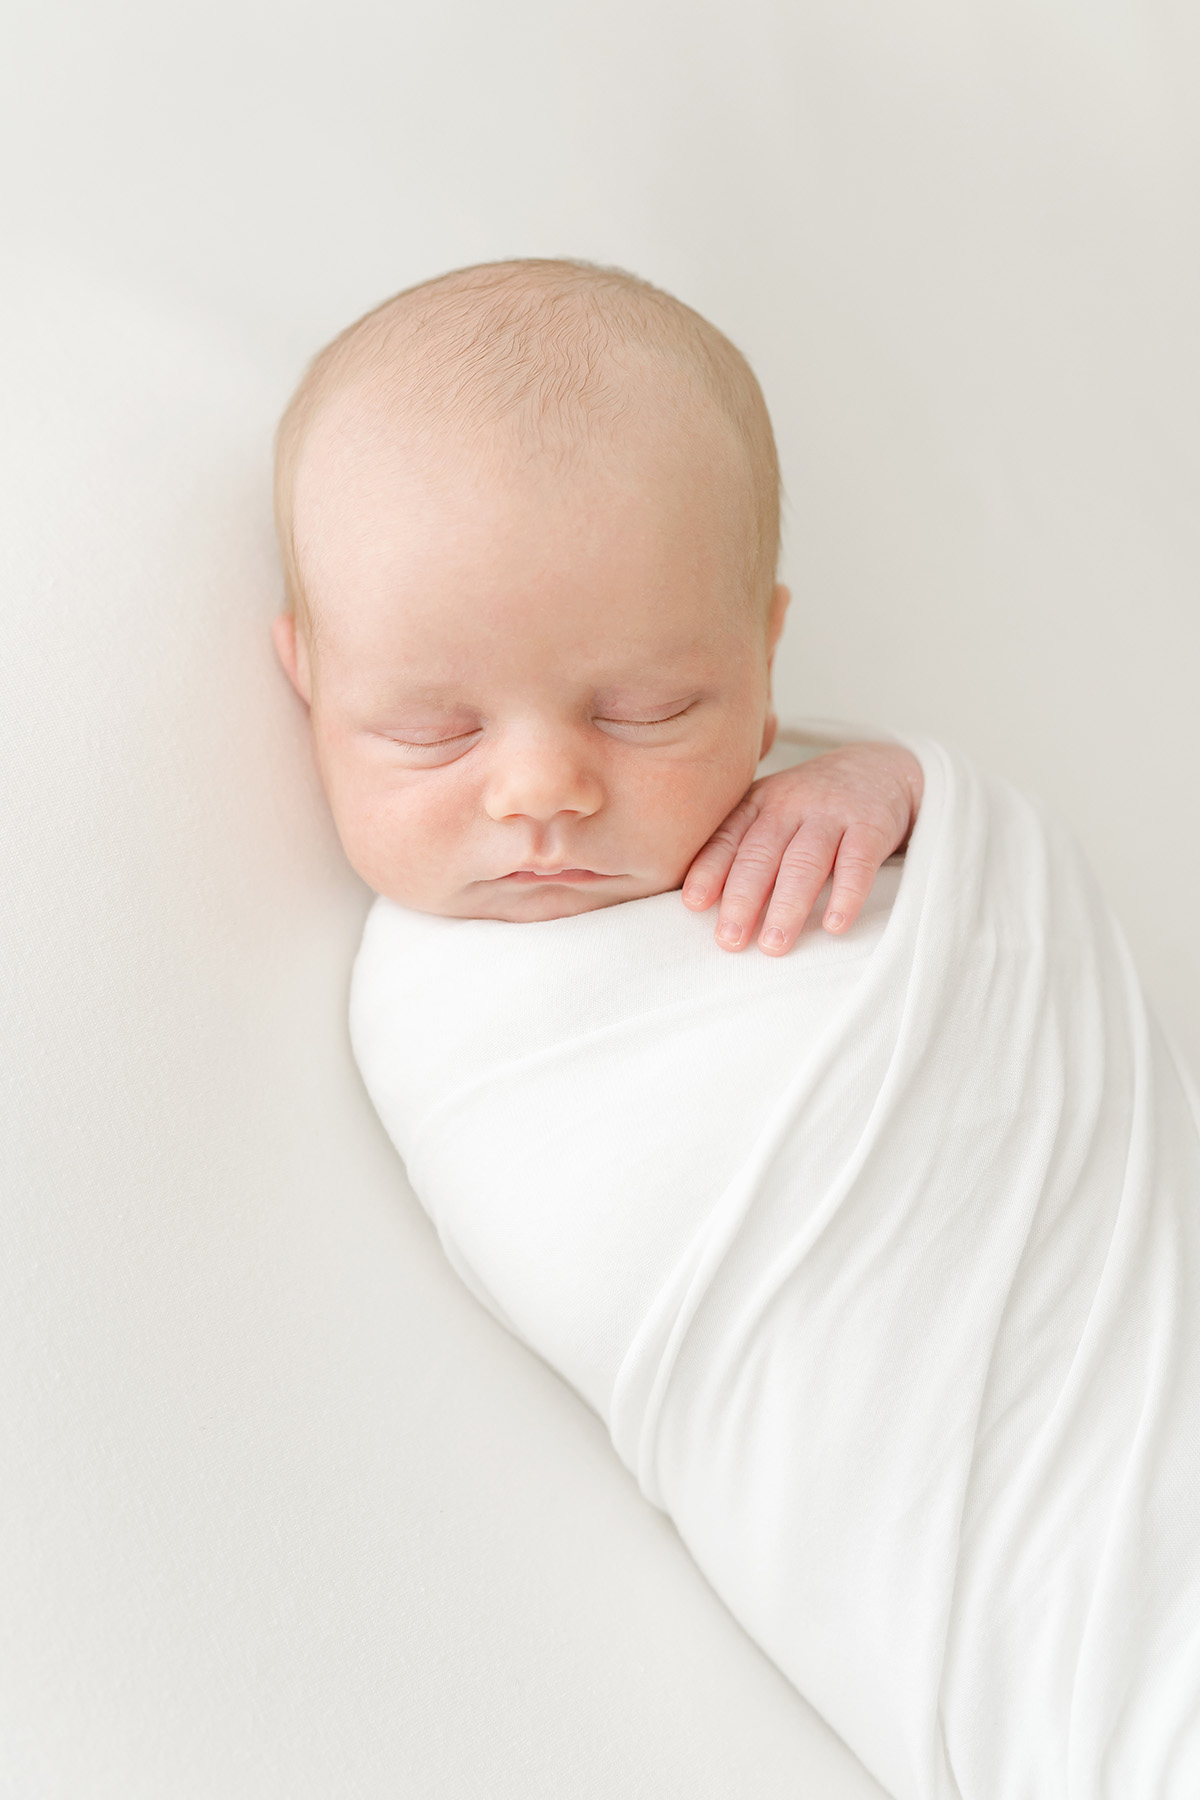 Louisville Ky newborn baby wrapped in a white swaddle sleeps during newborn photo session at Julie Brock Photography in Louisville KY